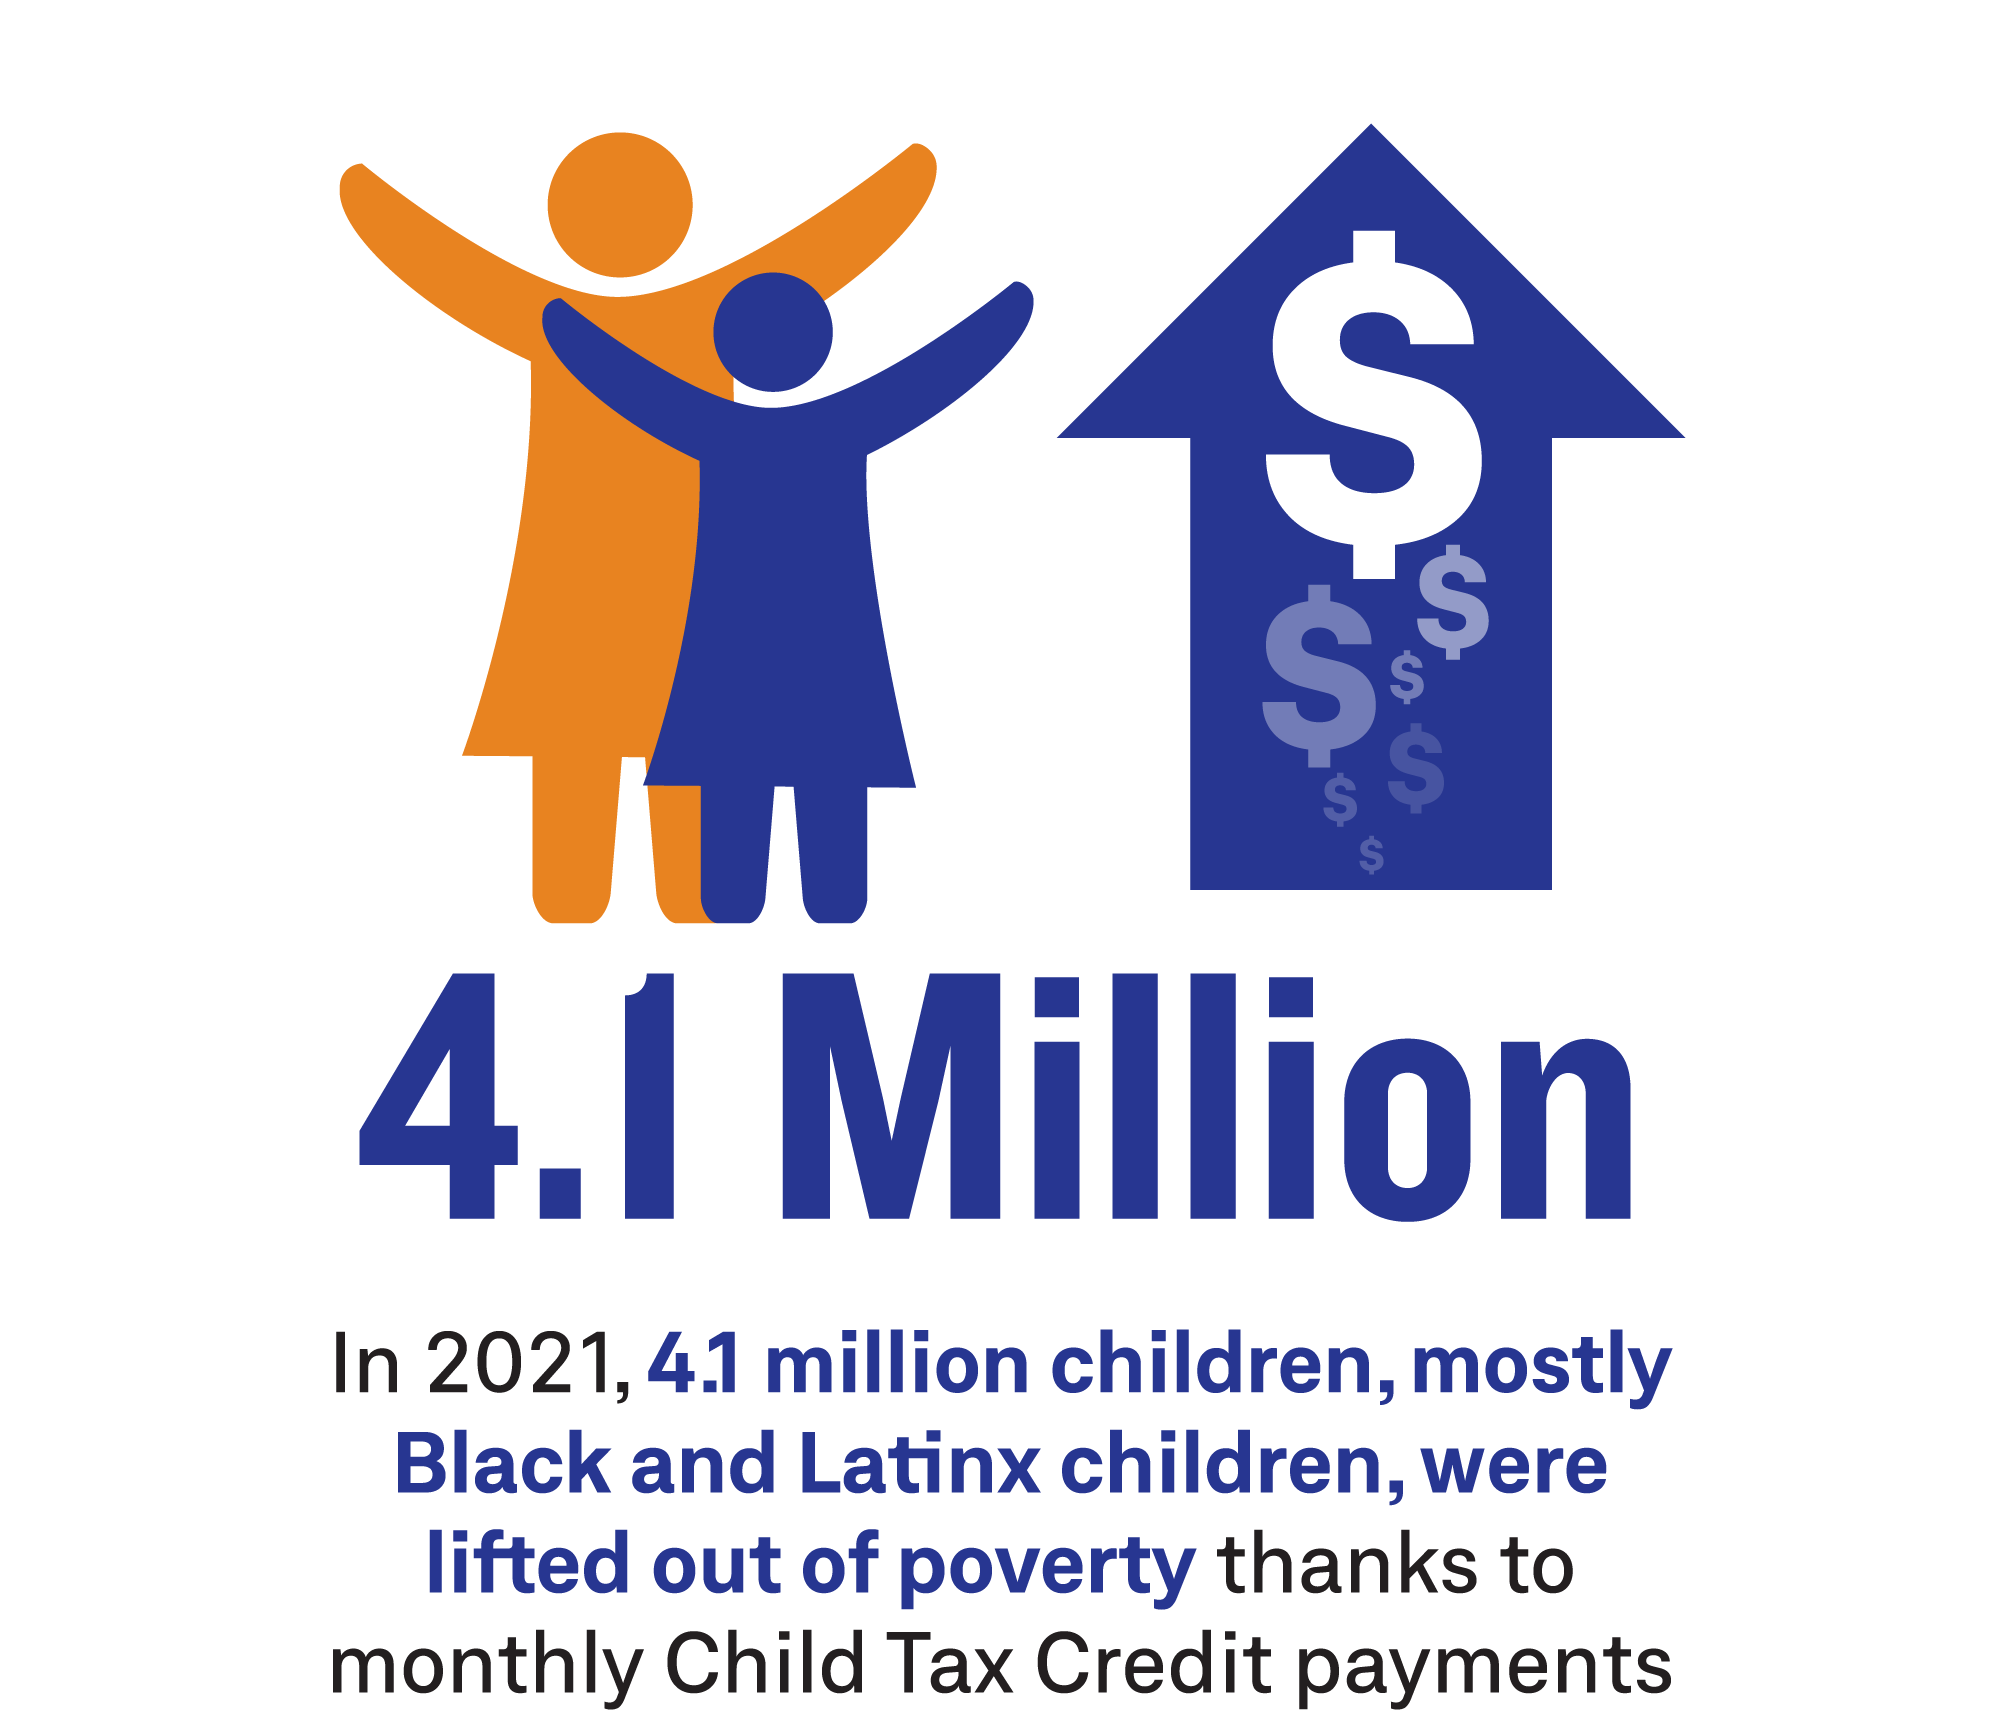 In 2021, 4.1 million children, mostly Black and Latinx children, were lifed out of poverty thanks to the monthly Child Tax Credit payments